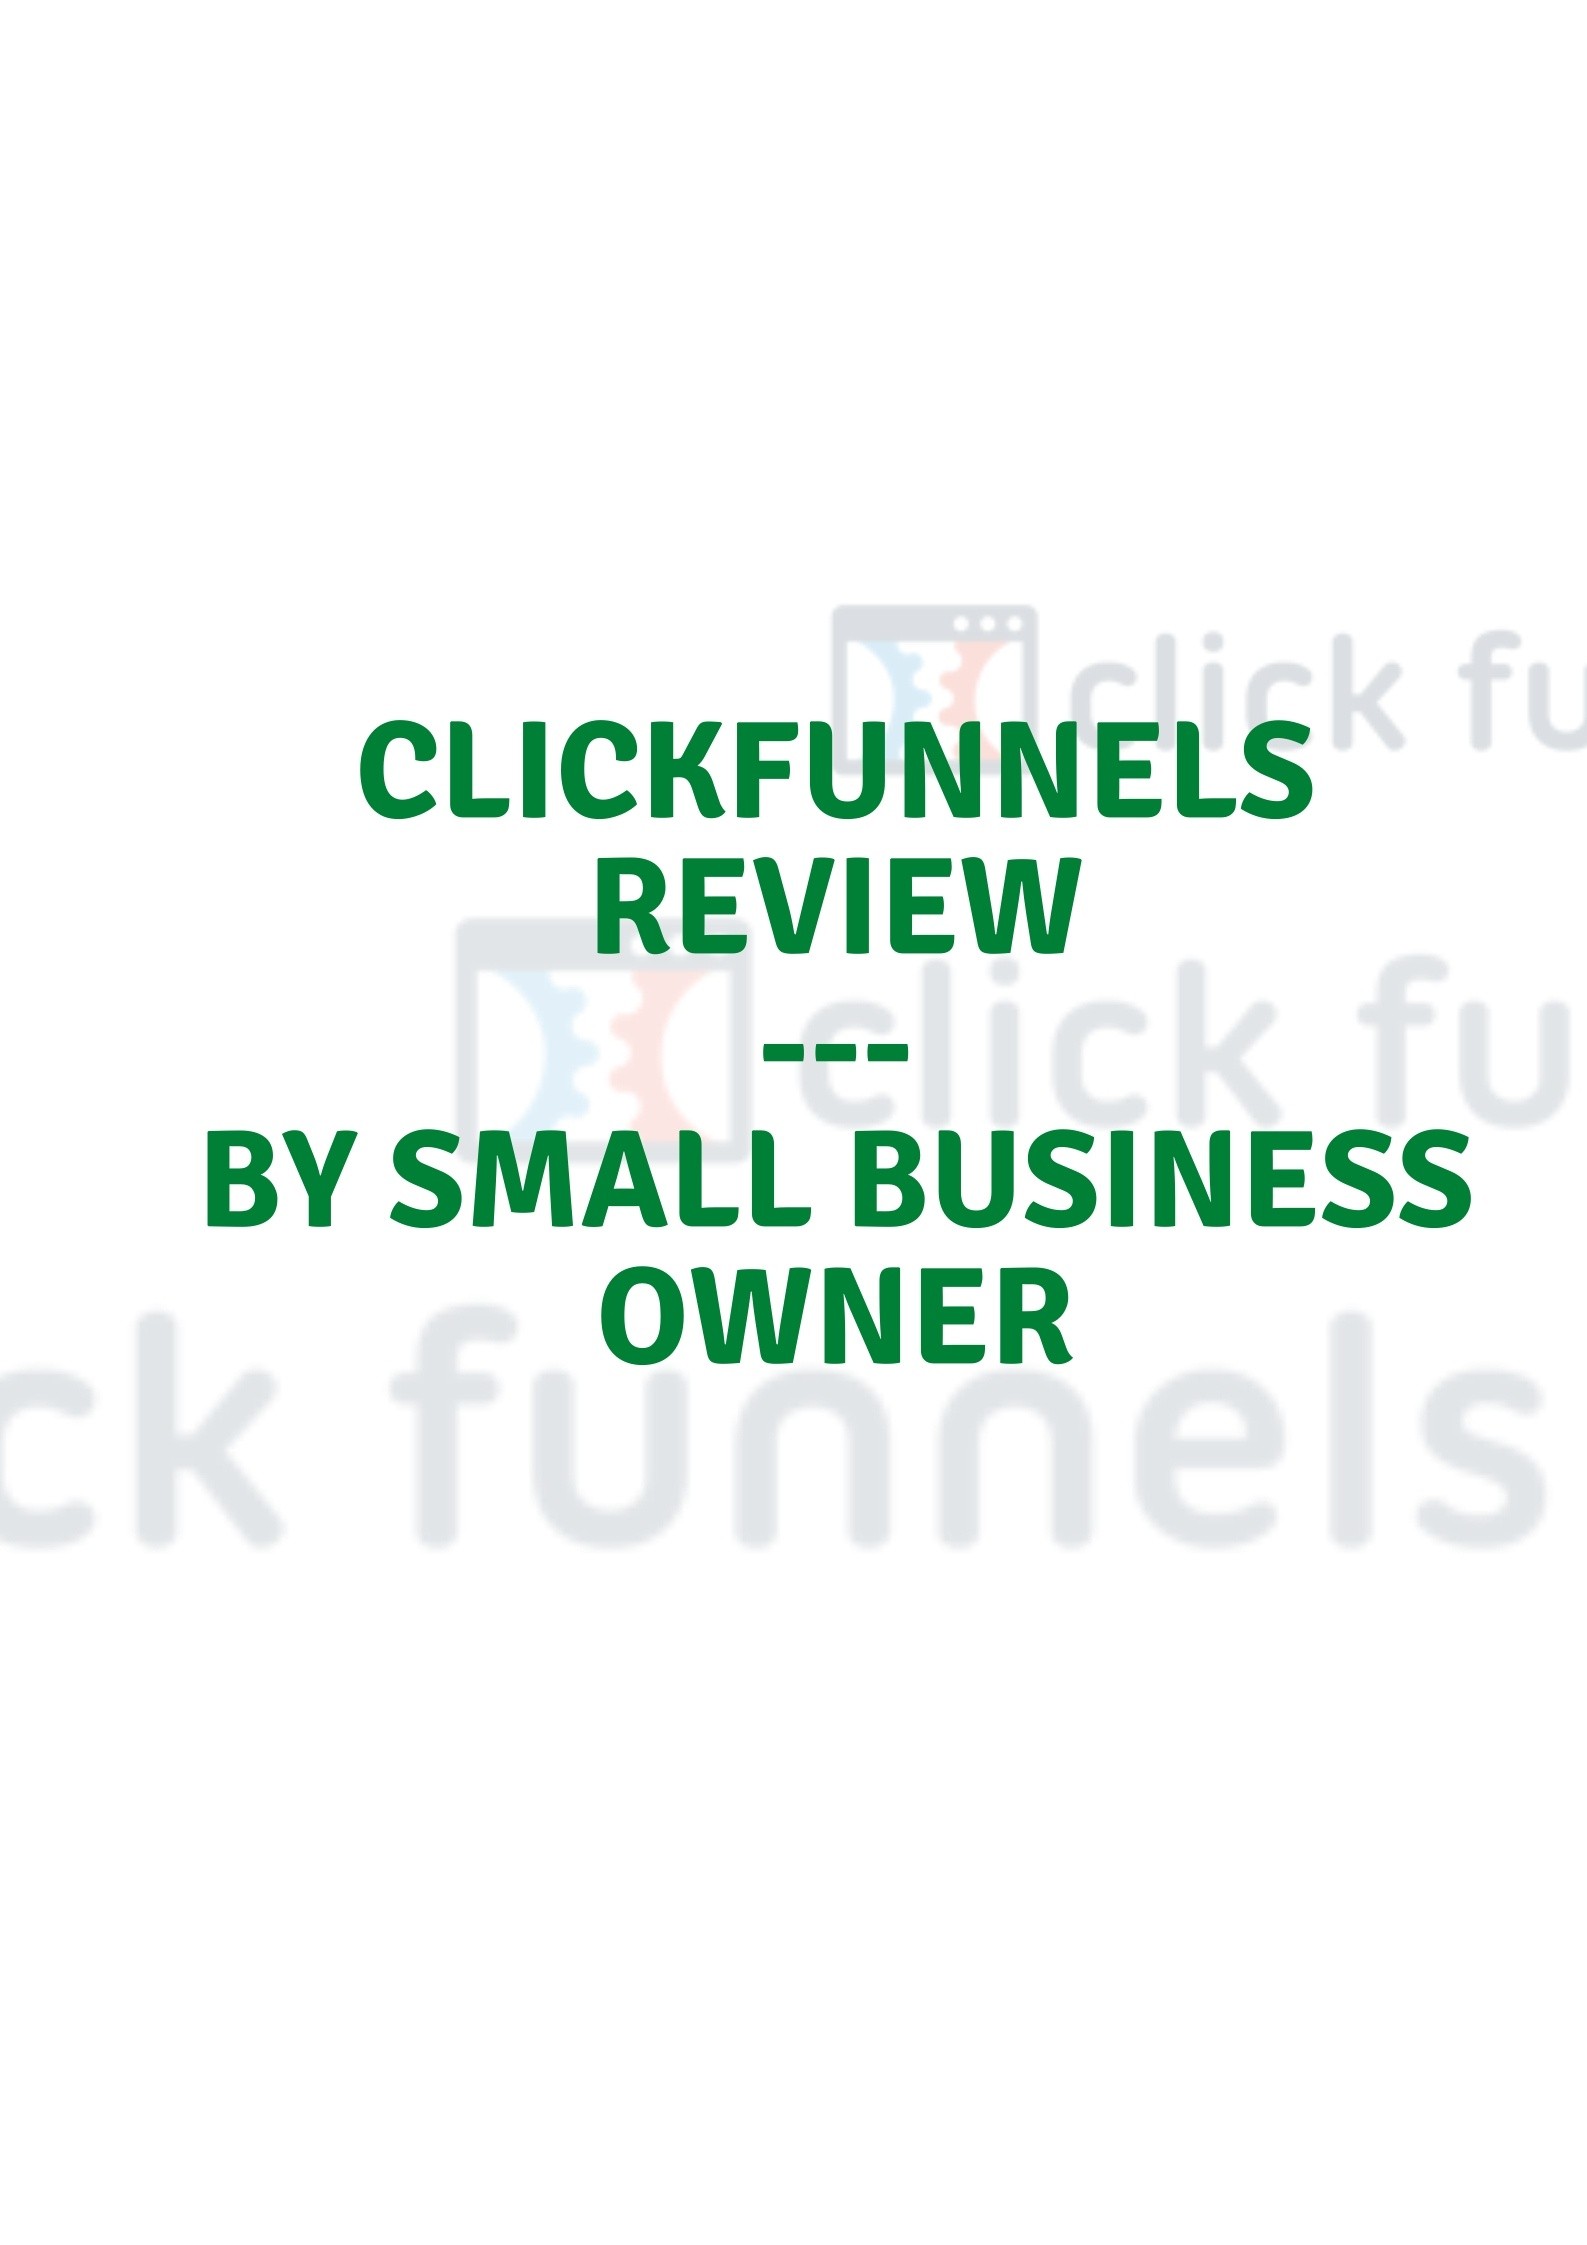 Clickfunnels review --- by small business owner